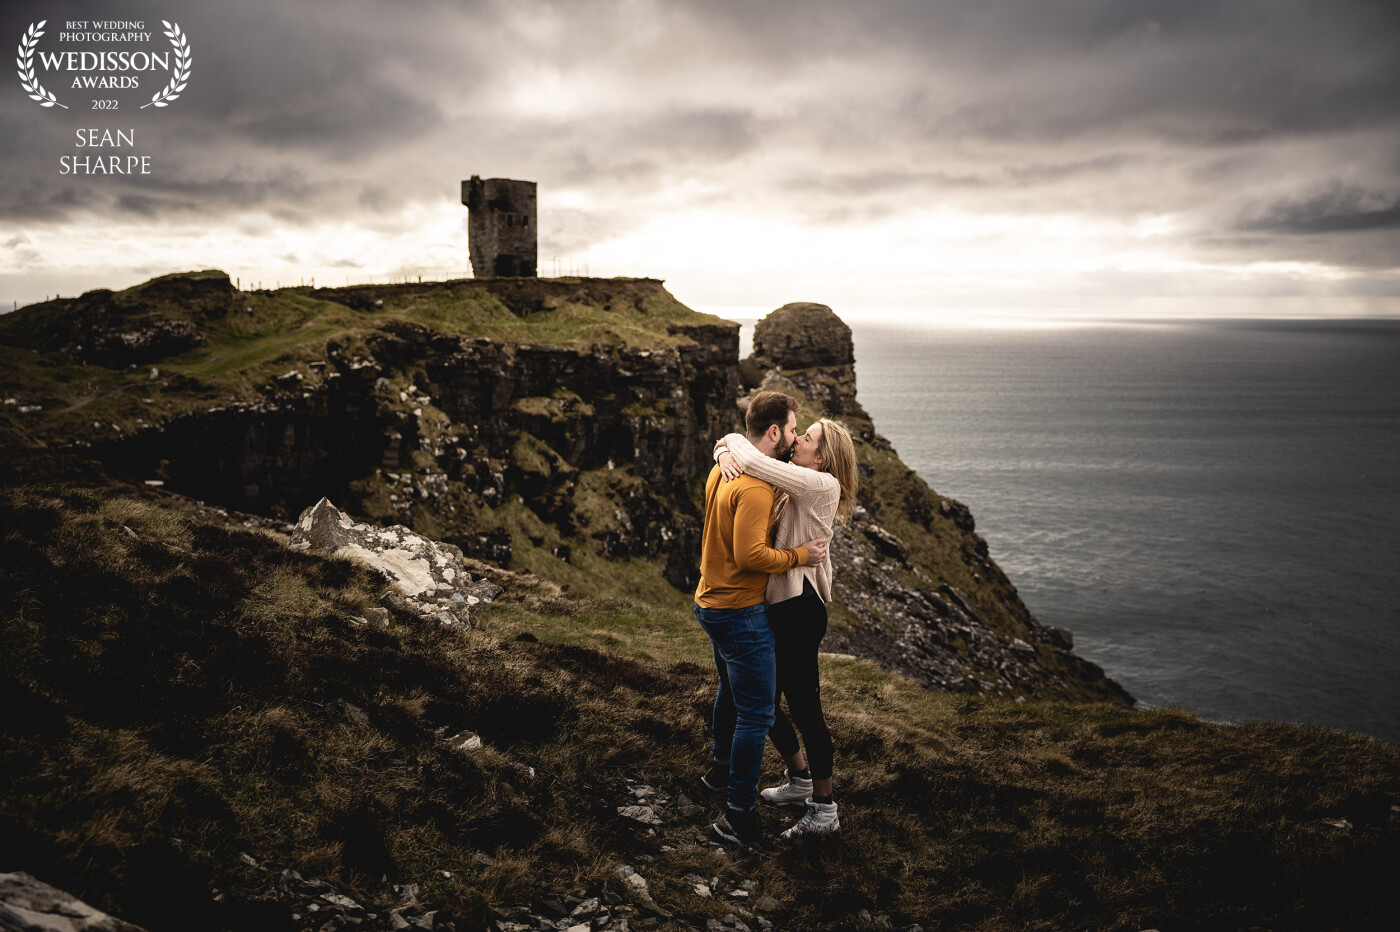 Taken at the beautiful Cliffs of Moher, Ireland. Tim and Elly were on holidays in Ireland when Tim planned his proposal. The light was just so superb as we were wrapping up afterwards! What a day. What a couple! More shoots here, please!